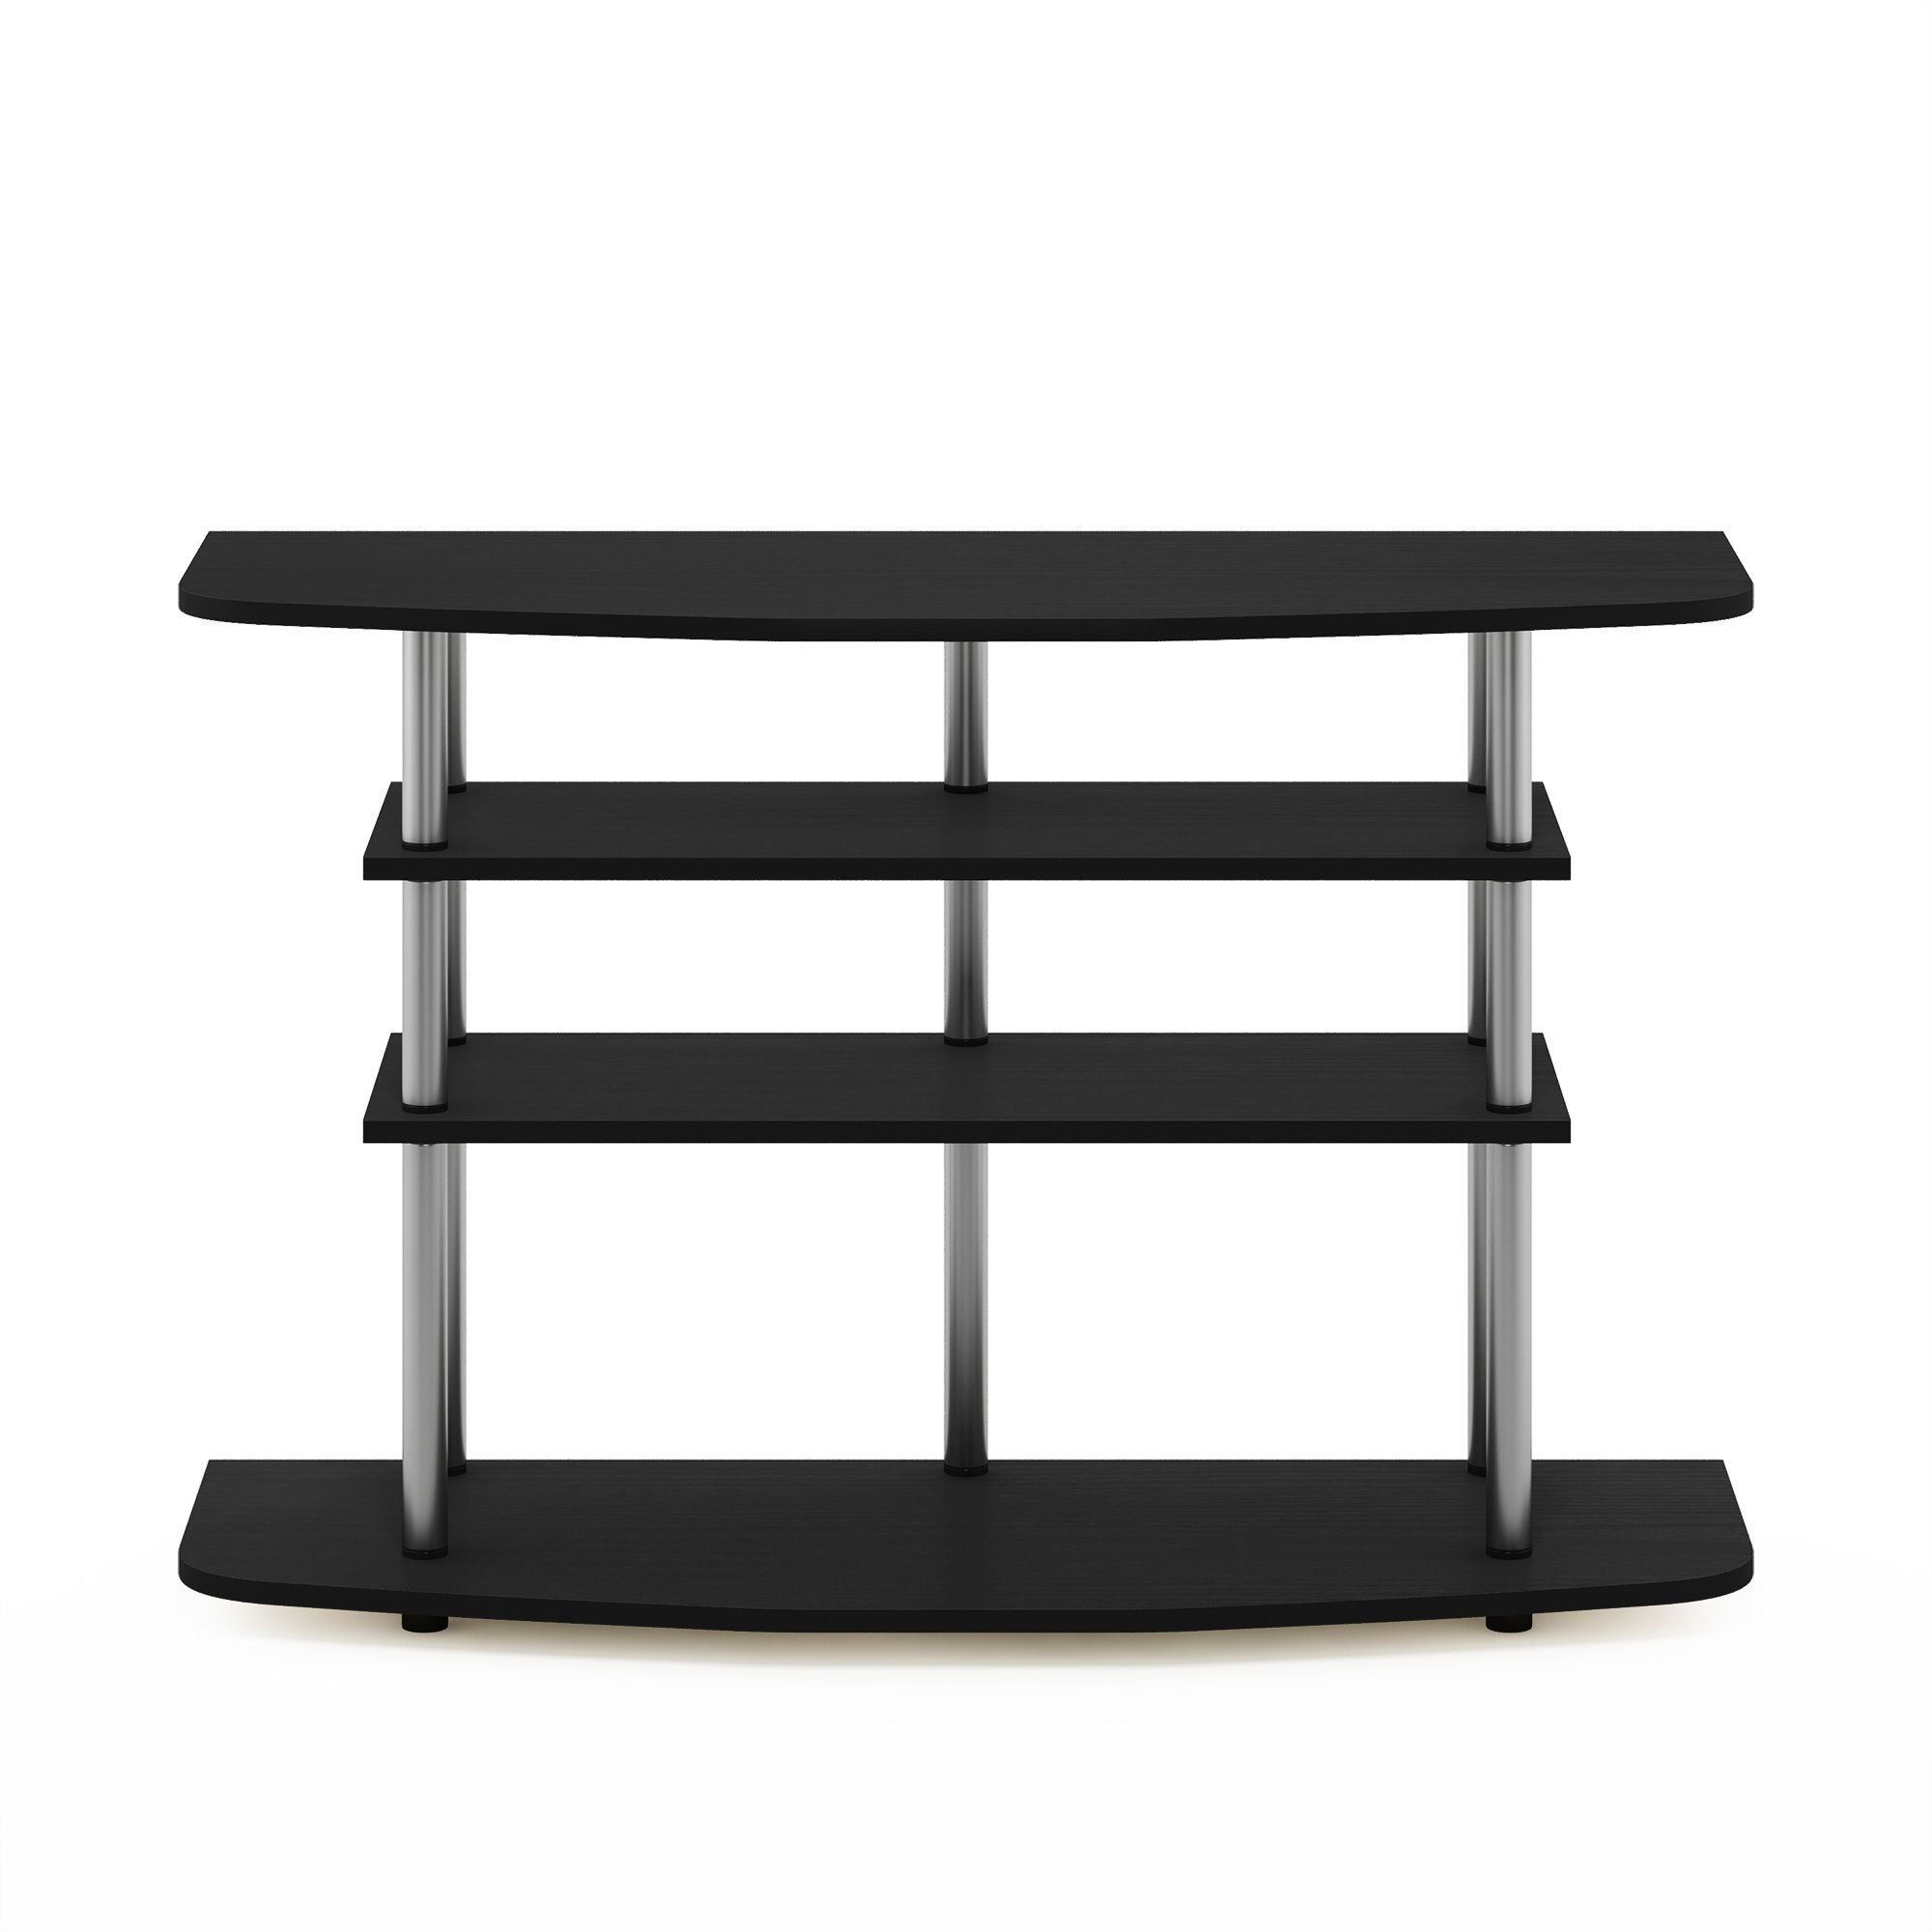 Furinno Frans Turn N Tube 4 Tier Tv Stand For Tv Up To 46 Inside Furinno Jaya Large Tv Stands With Storage Bin (View 7 of 15)